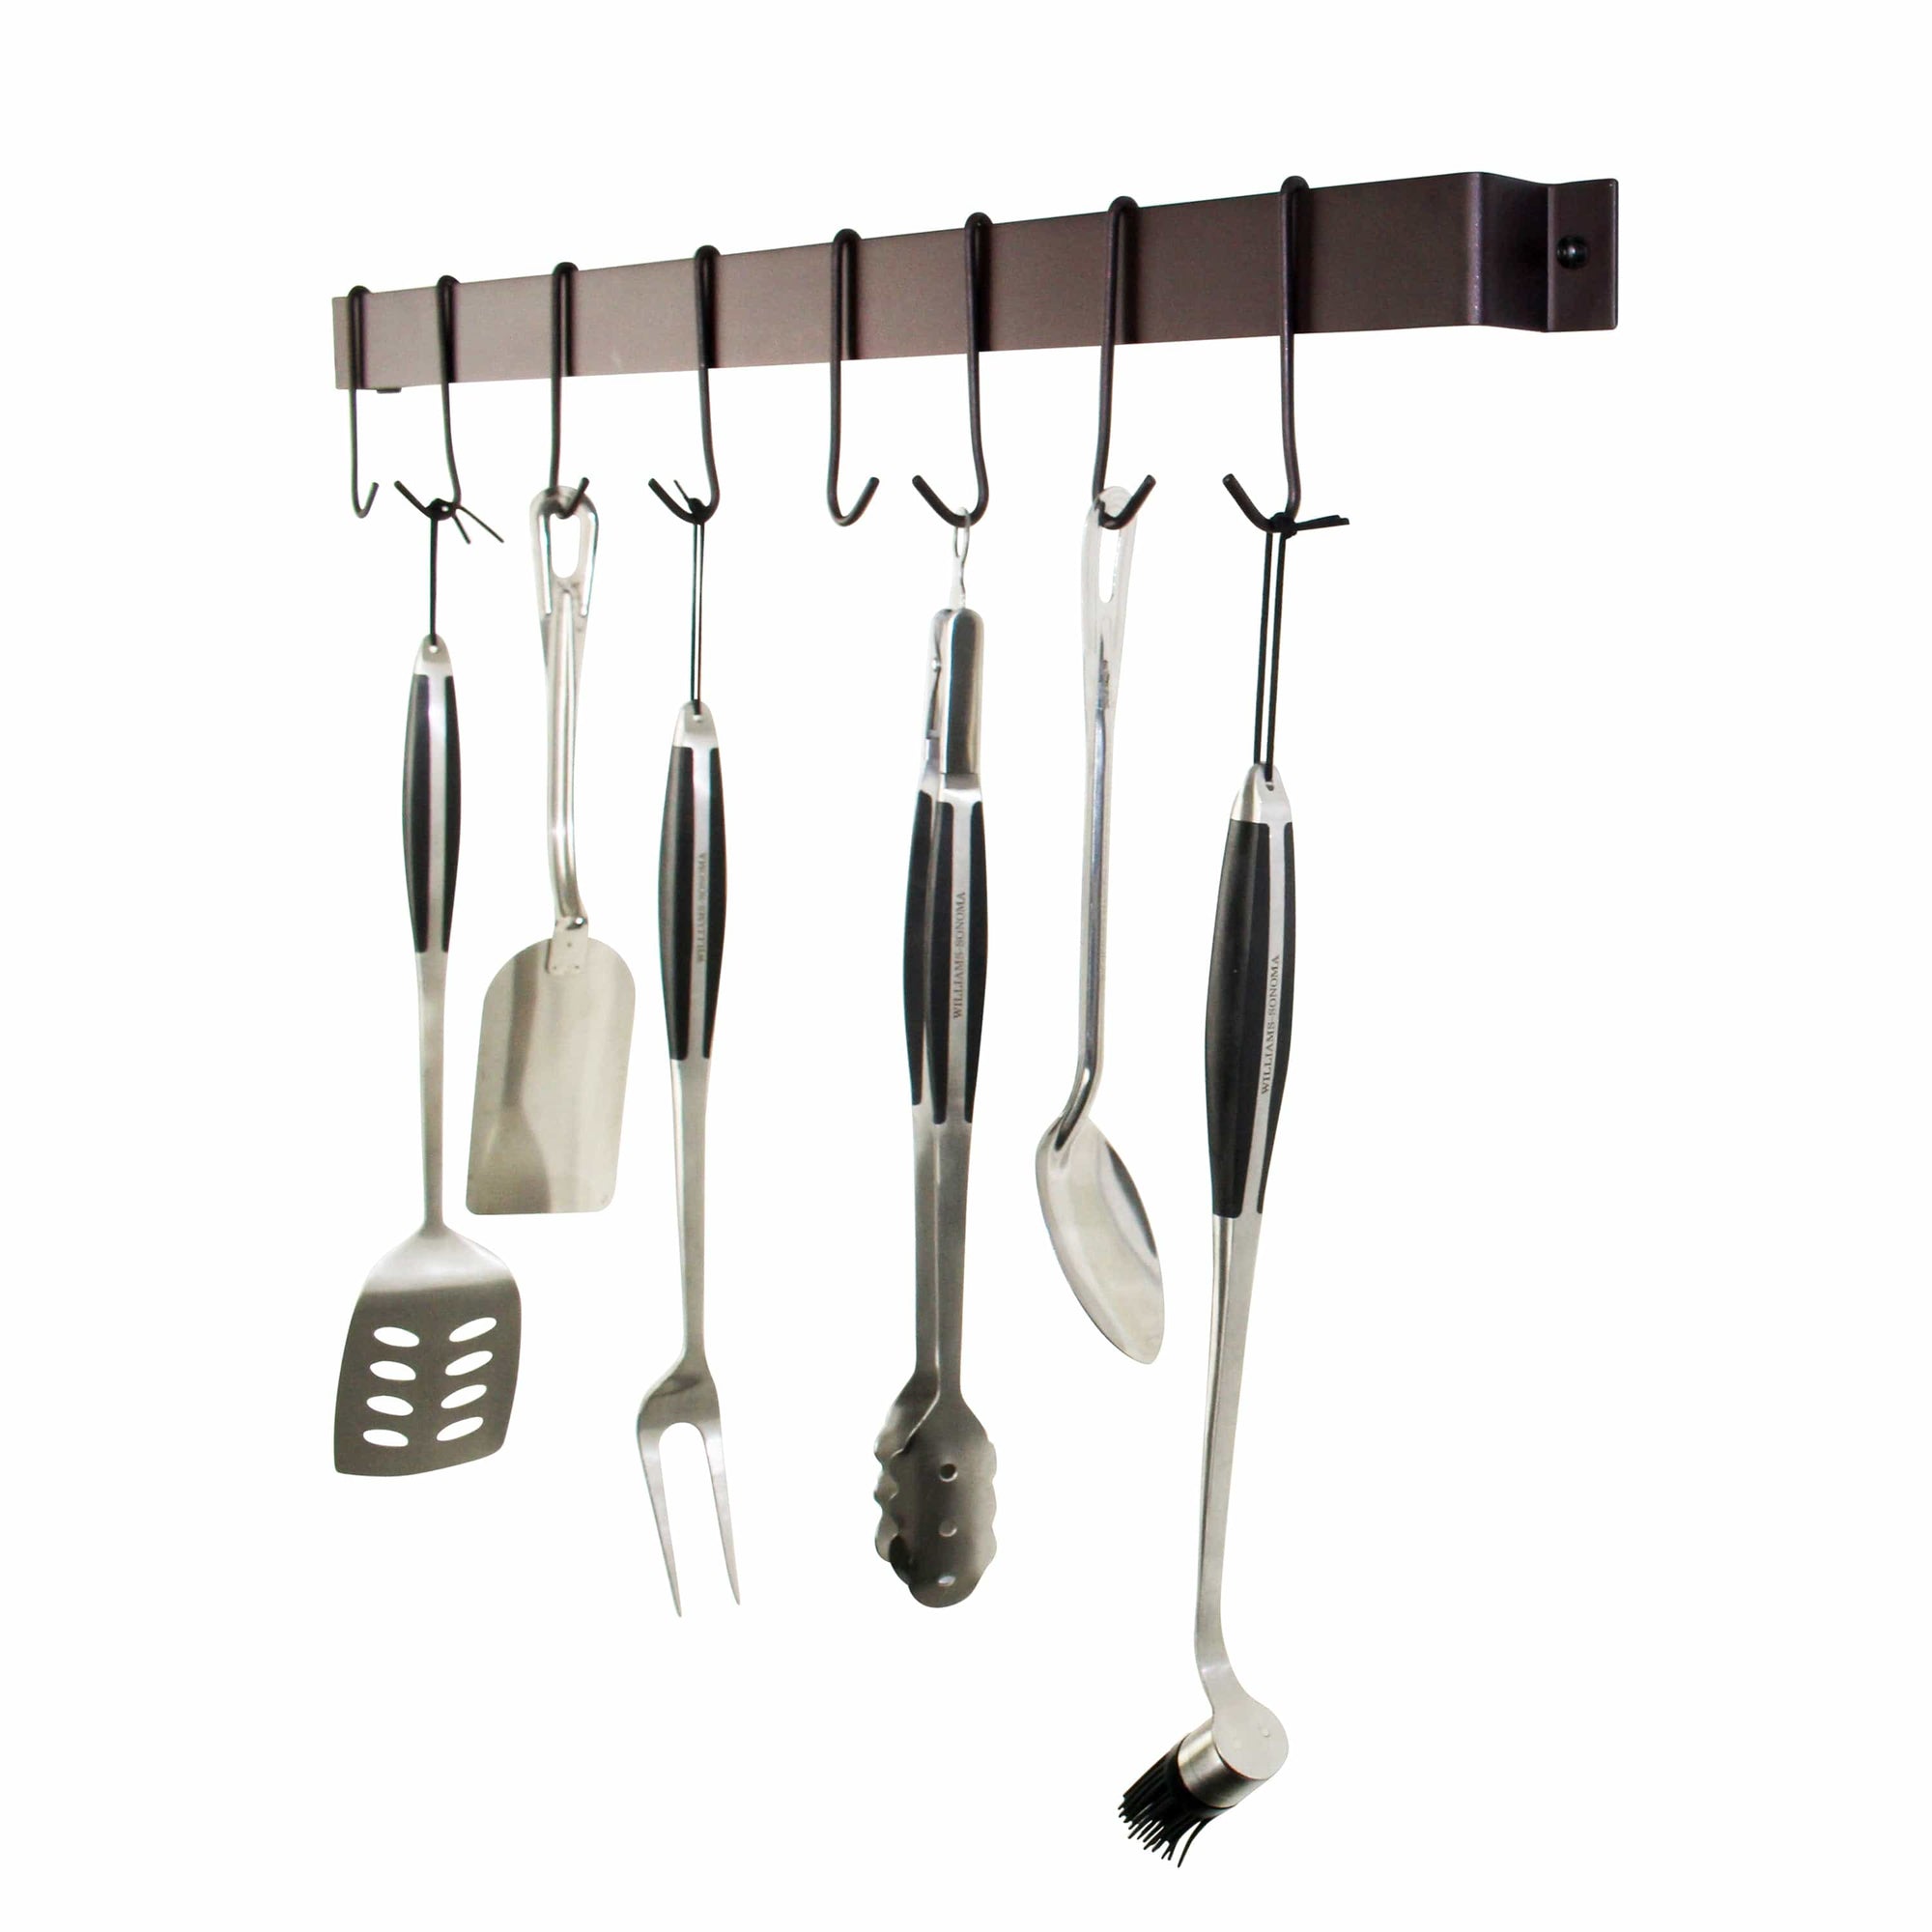 WONMILLE Gourmet Kitchen Utensil Rack with 6 Hooks, Wall Mounted Rail  Wrought Iron Hanging Utensil Holder Rack with Removable S Hooks 16 Inch  (Black-6